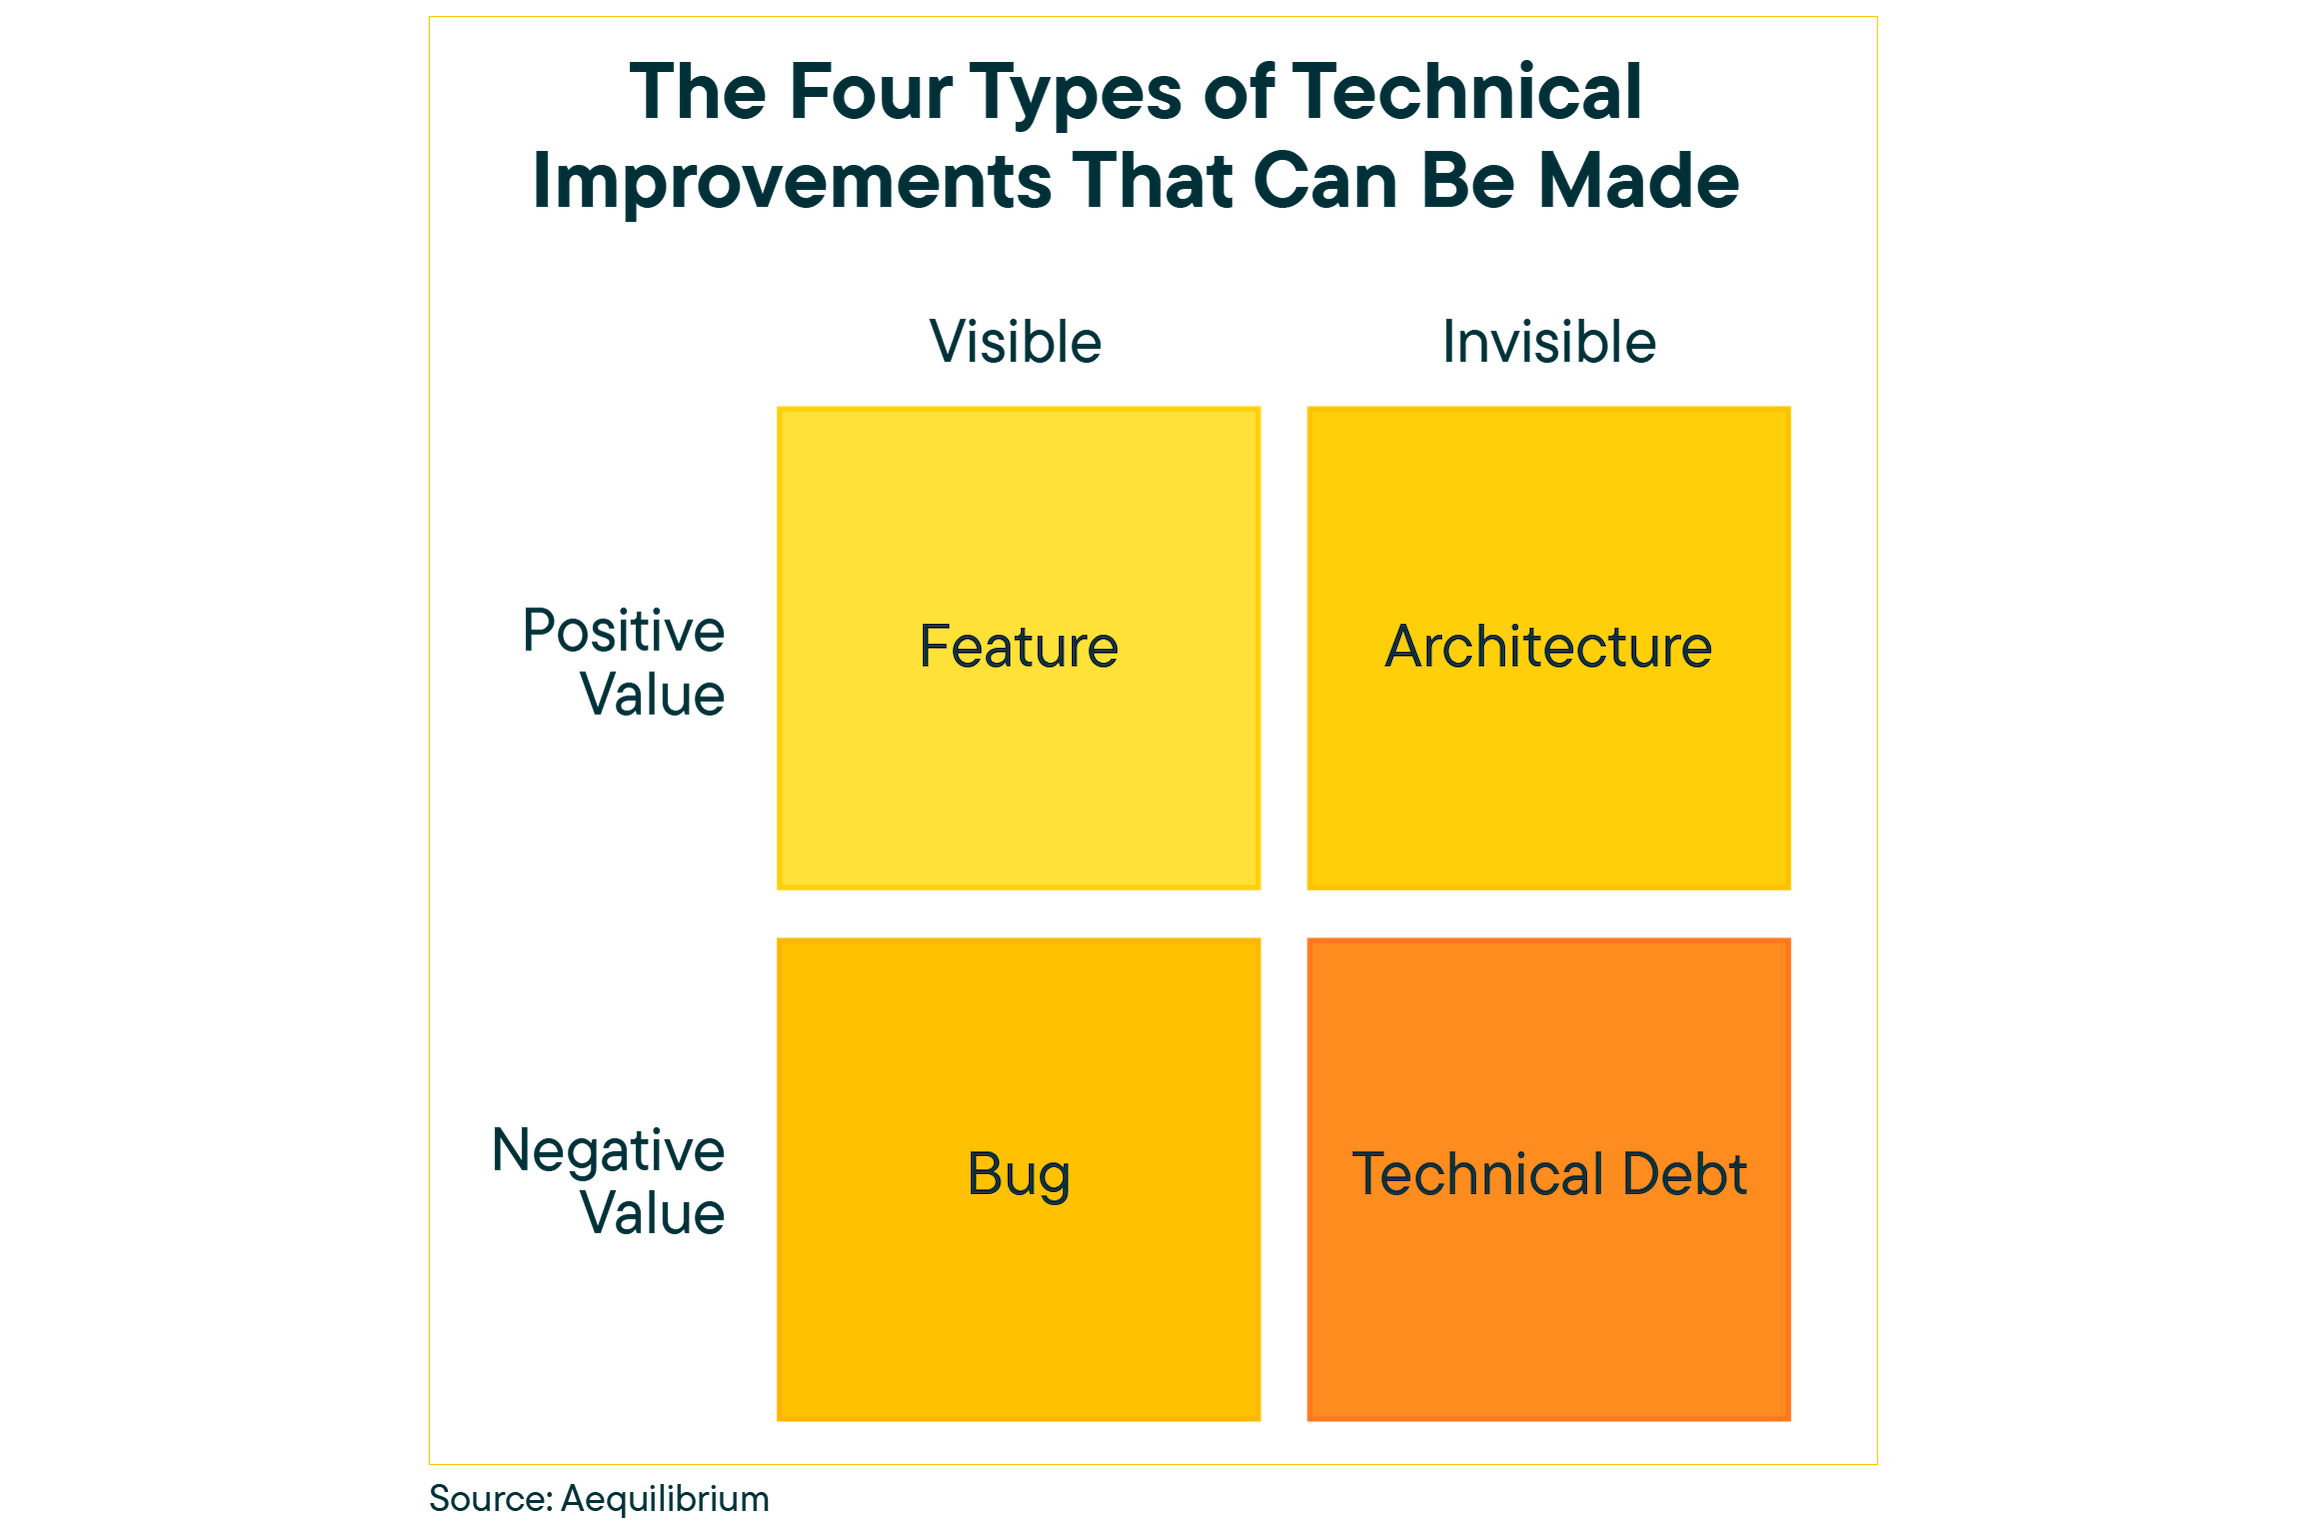 The 4 types of technical improvements